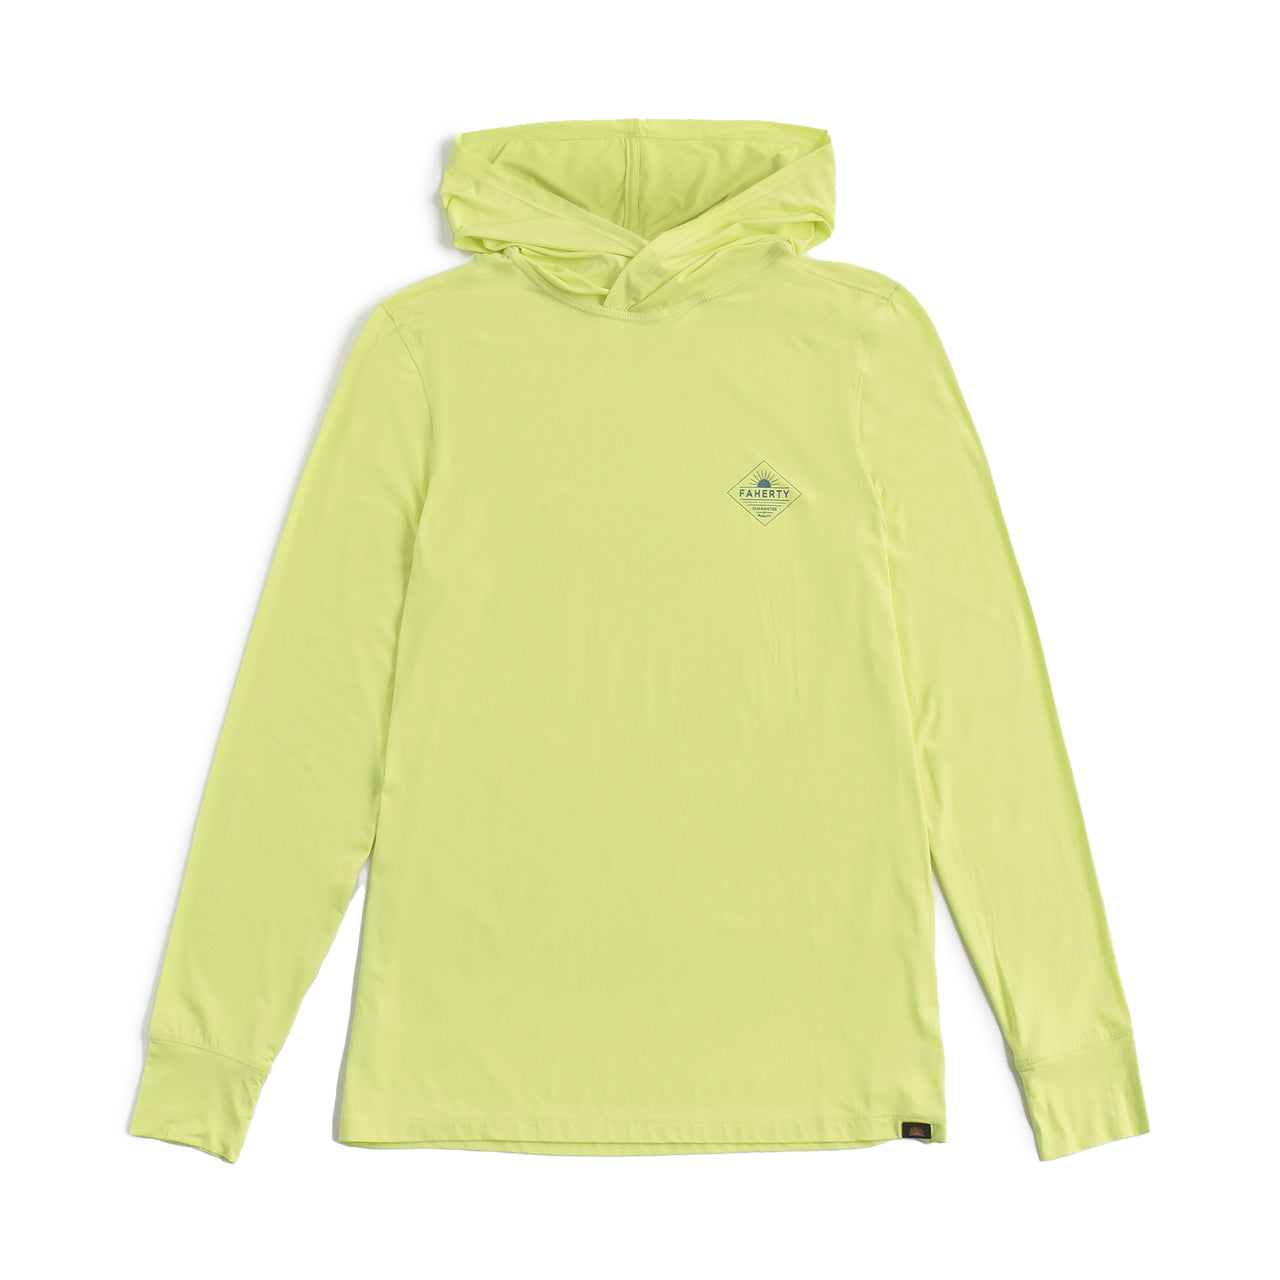 Faherty All Day Air UPF Hoodie Bright Lemon / Large